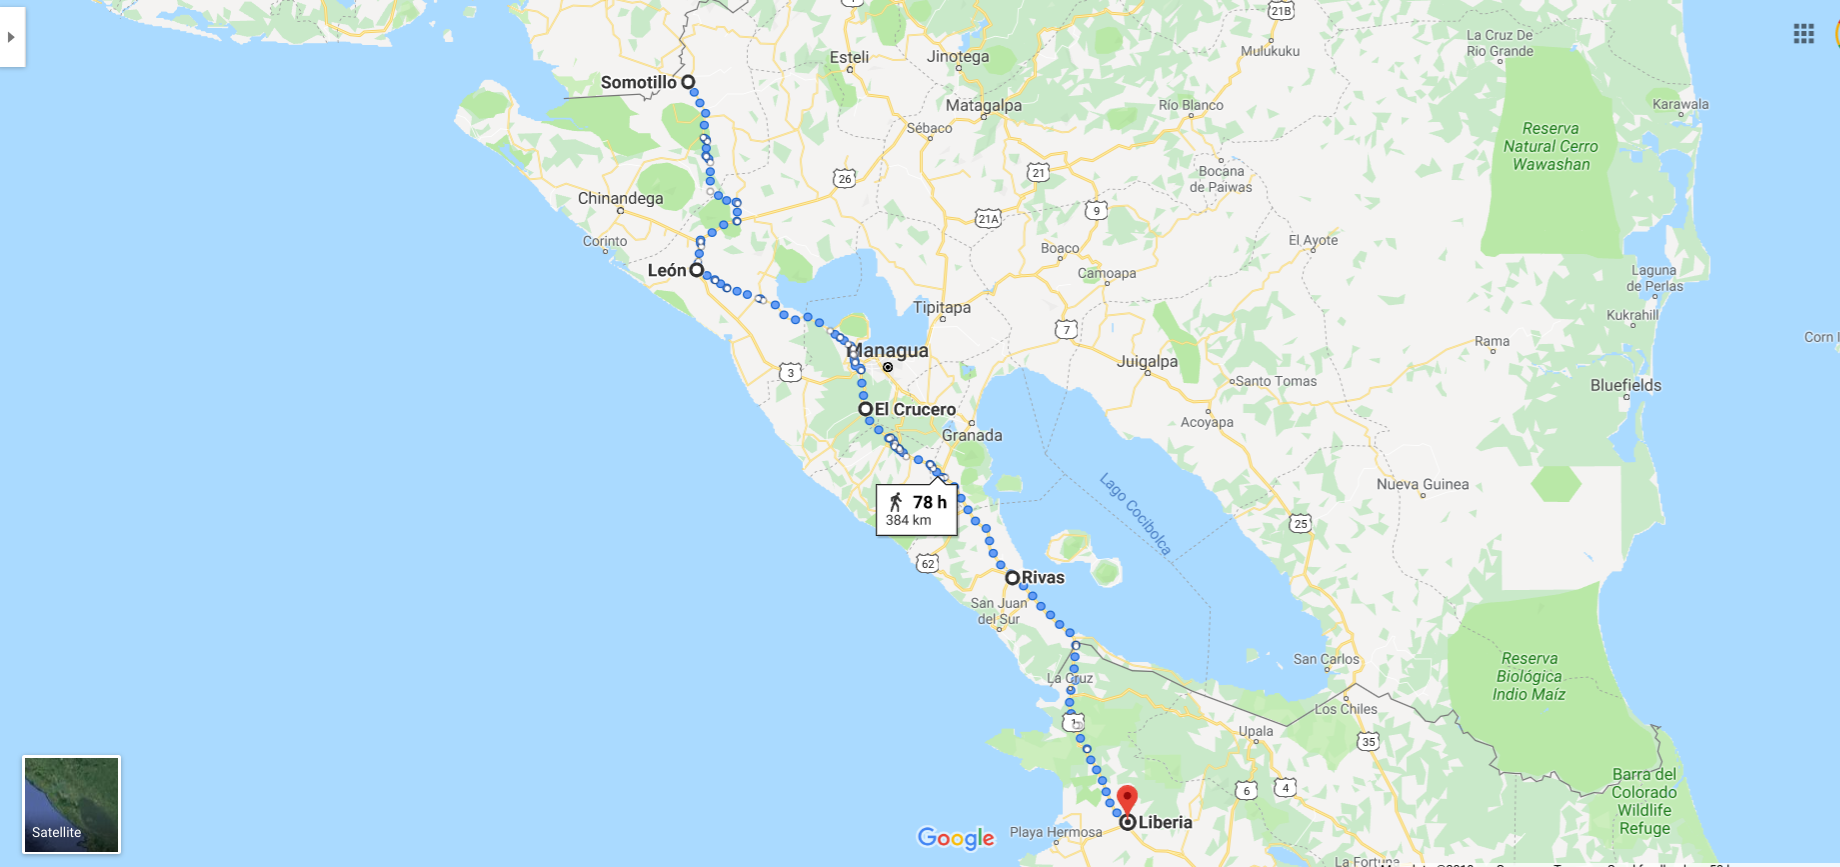 My cycling route through Nicaragua